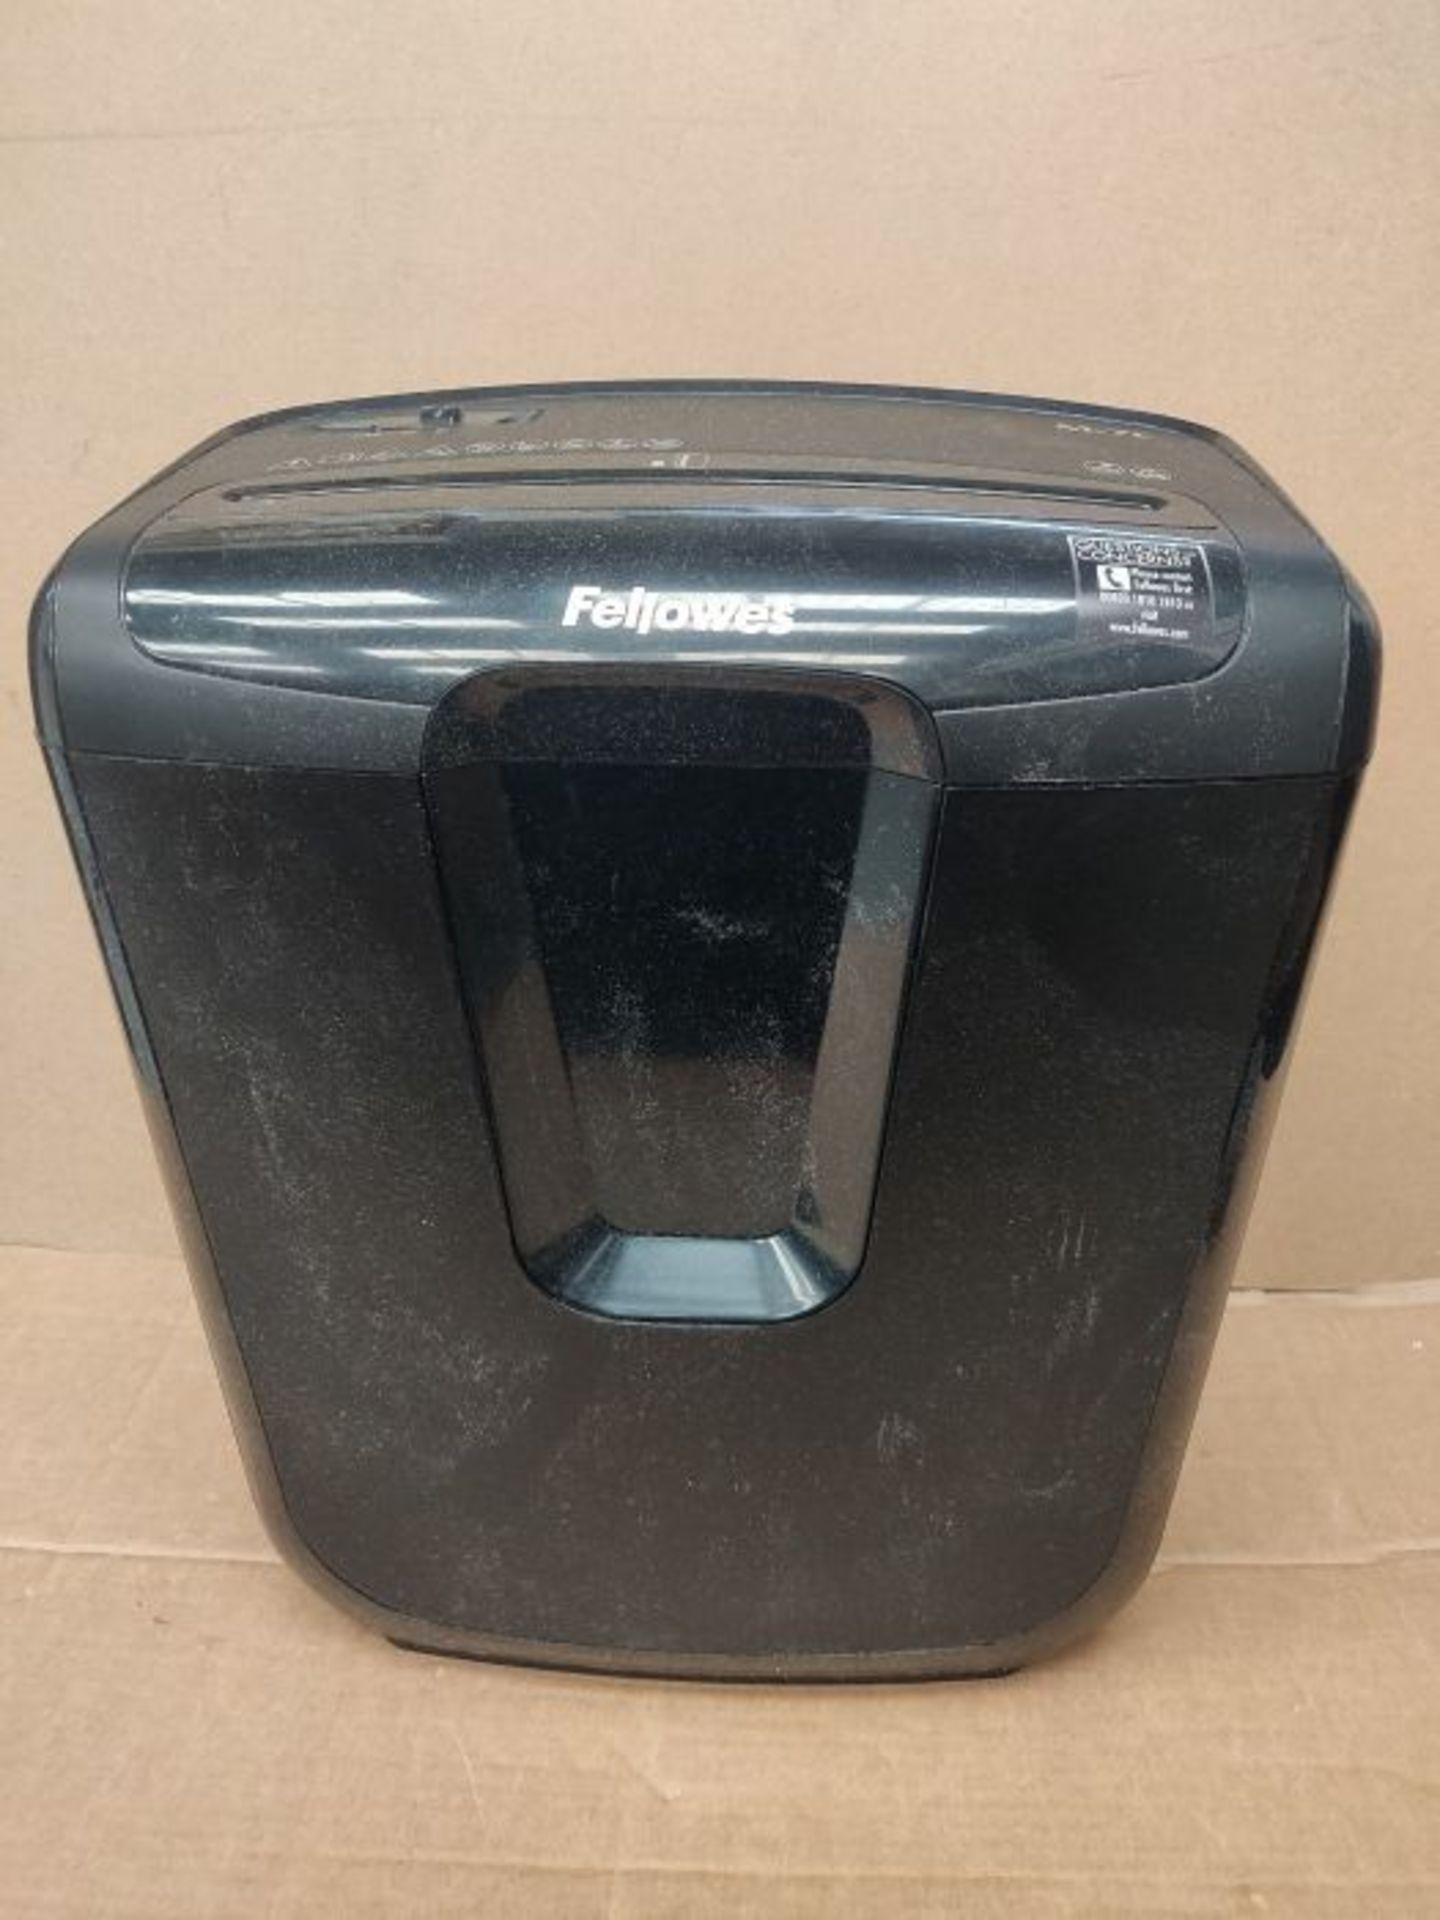 Fellowes Powershred M-7C Personal 7 Sheet Cross Cut Paper Shredder for Home Use - Image 3 of 3